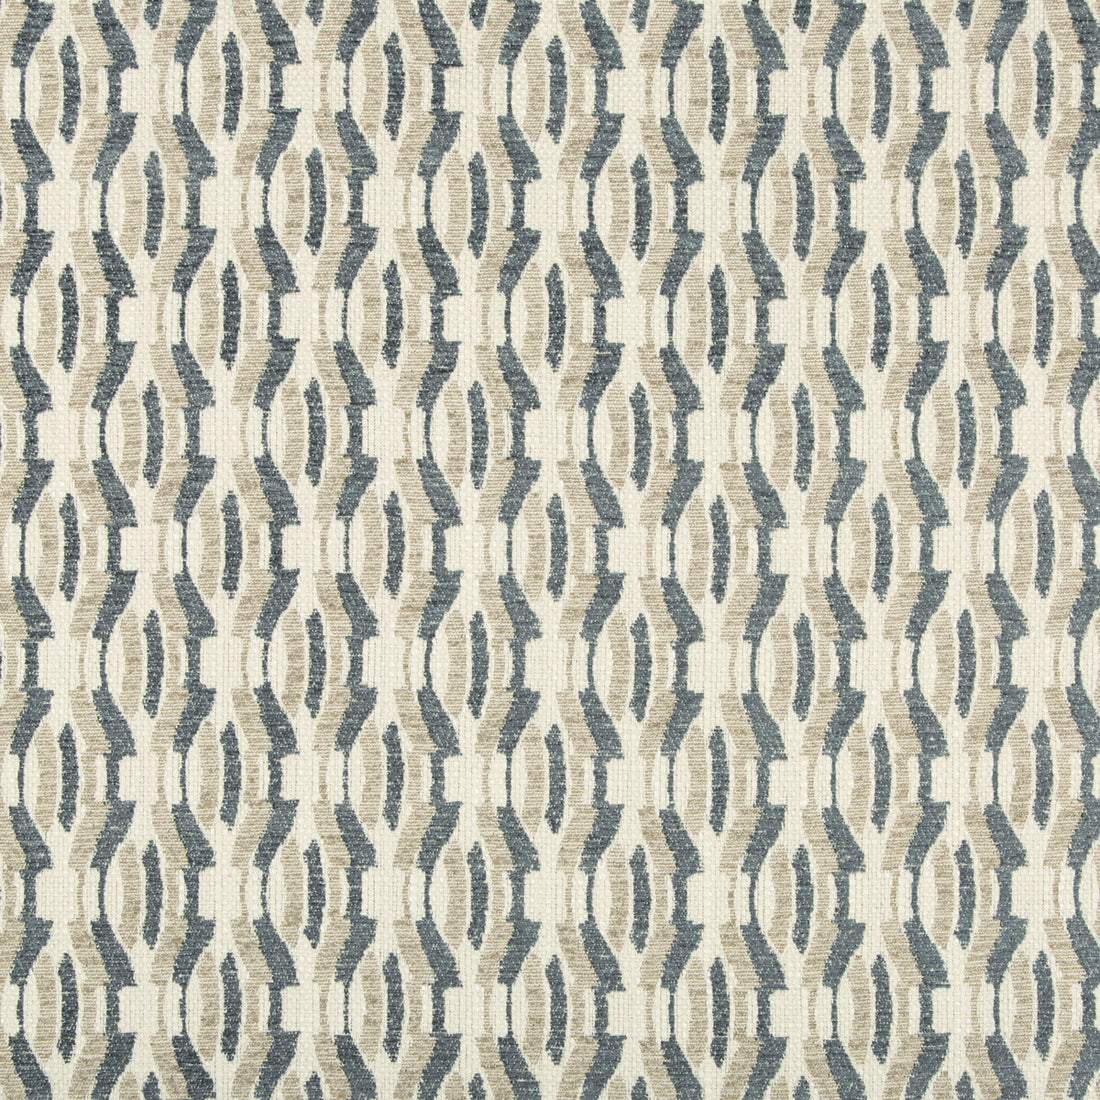 Agate Weave fabric in sea wave color - pattern GWF-3748.5.0 - by Lee Jofa Modern in the Gems collection